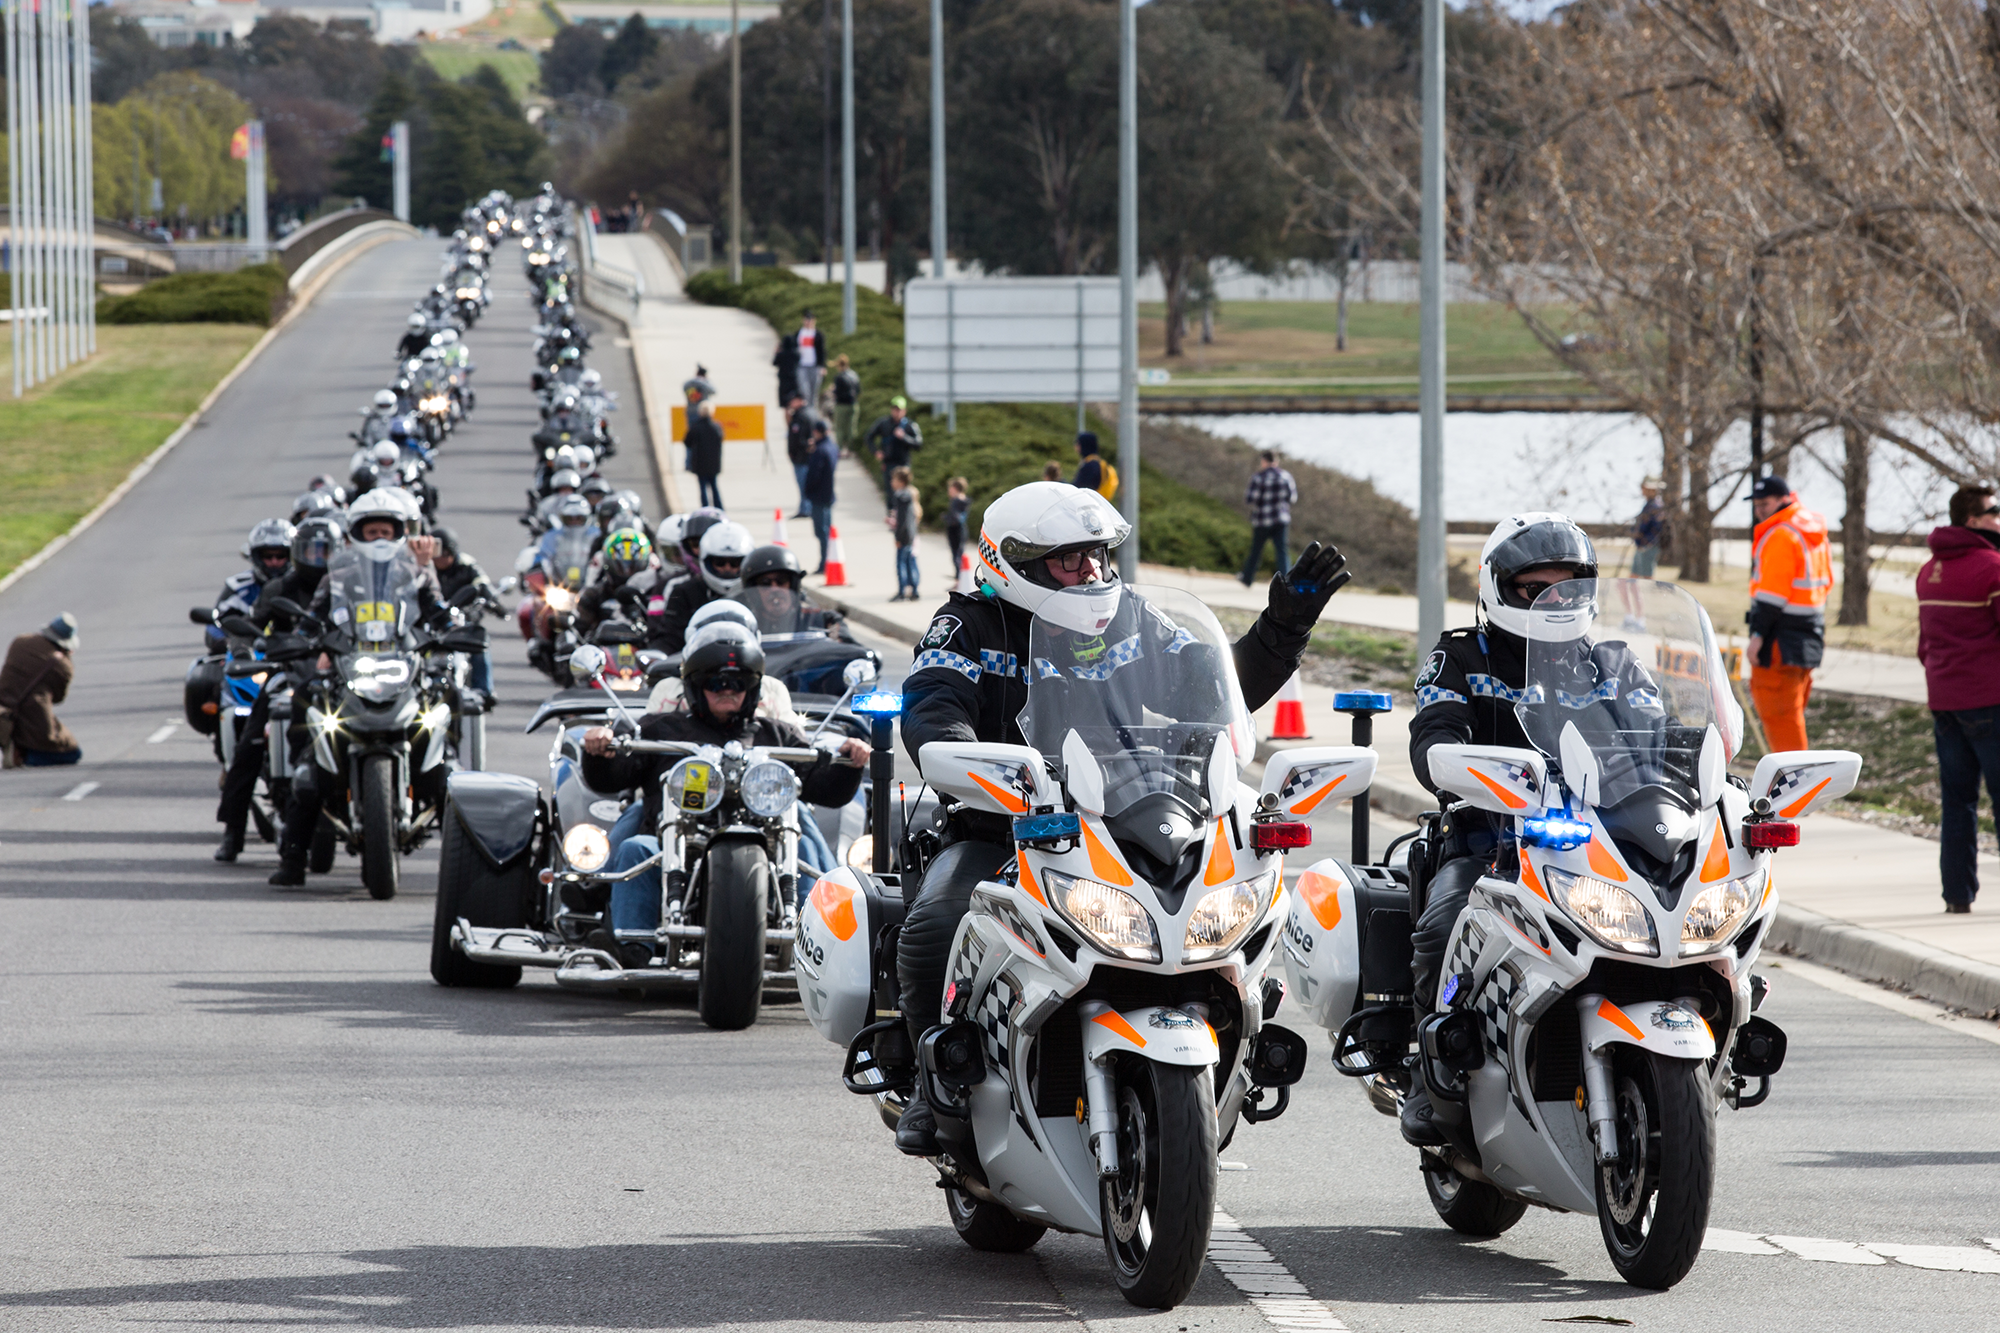 Photo wrap of police Wall to Wall Ride for Remembrance